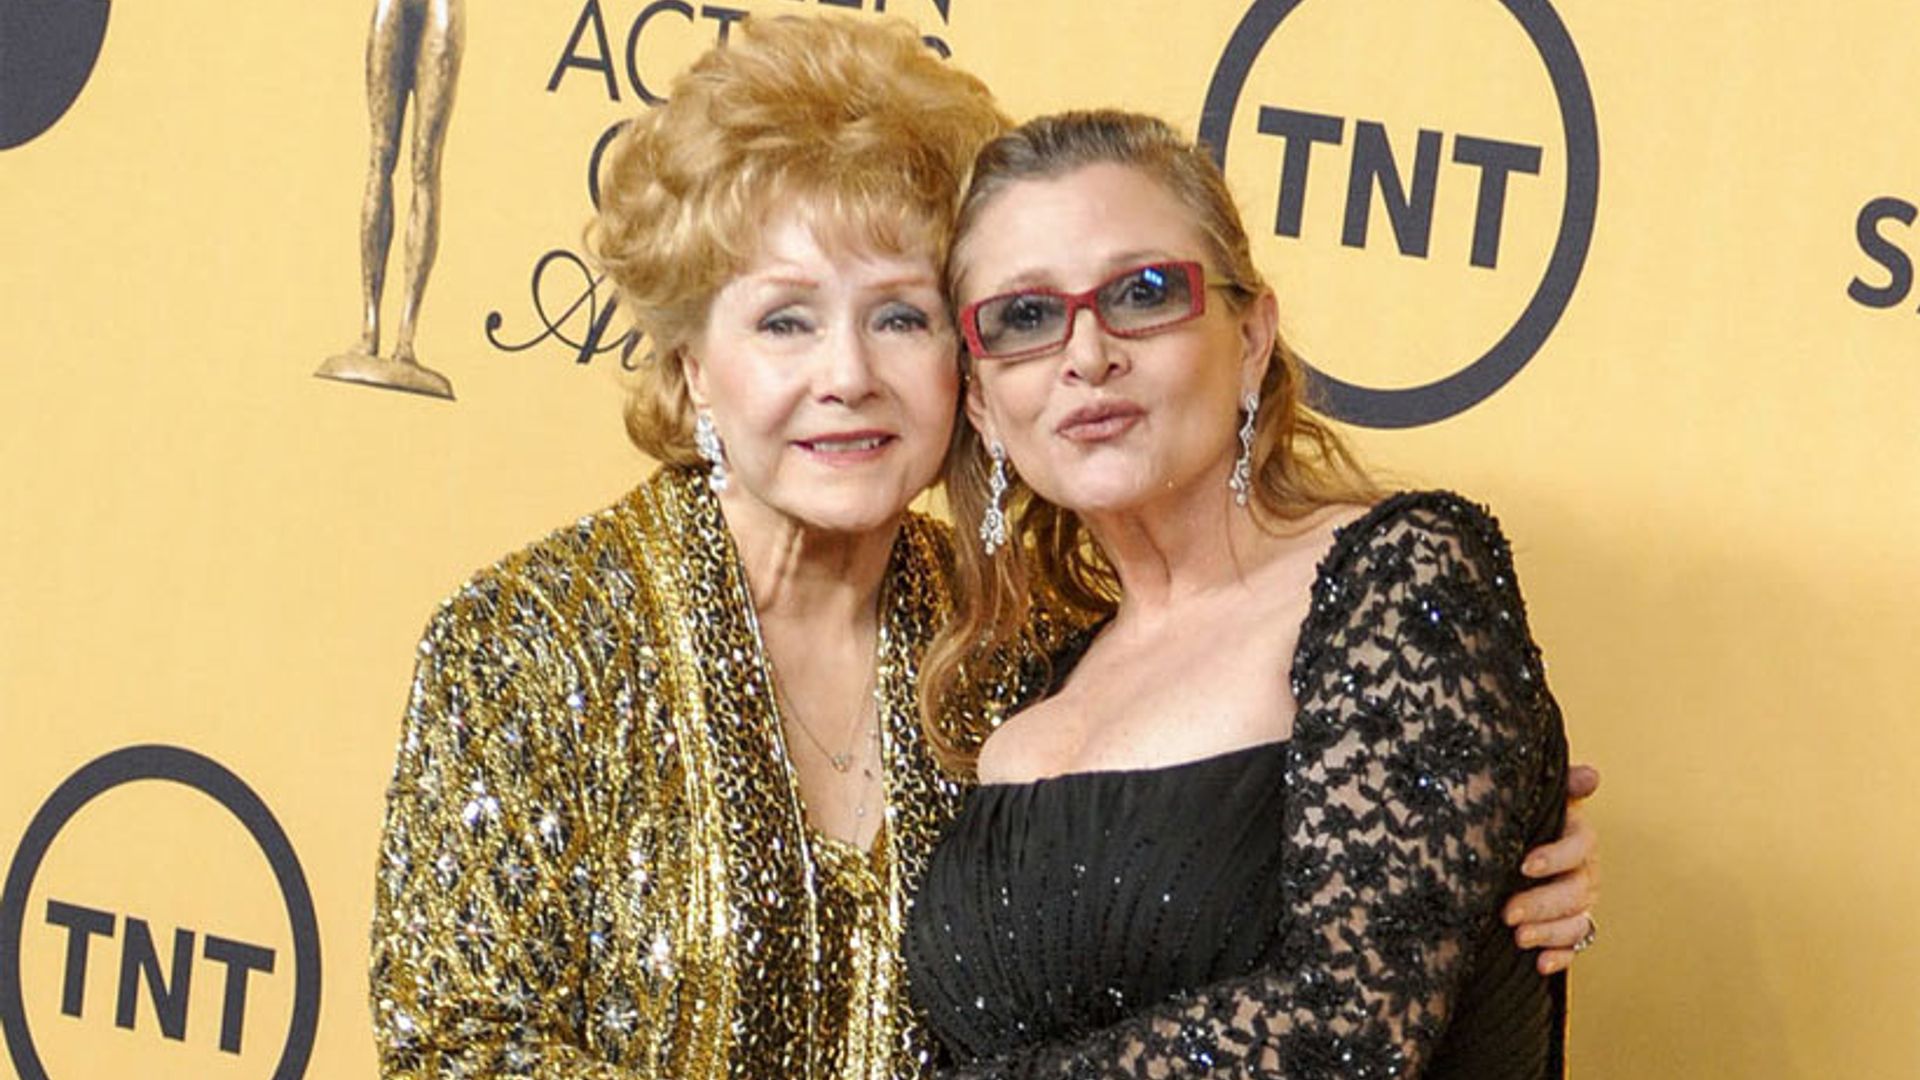 Plans for Carrie Fisher and Debbie Reynolds' public memorial have been announced